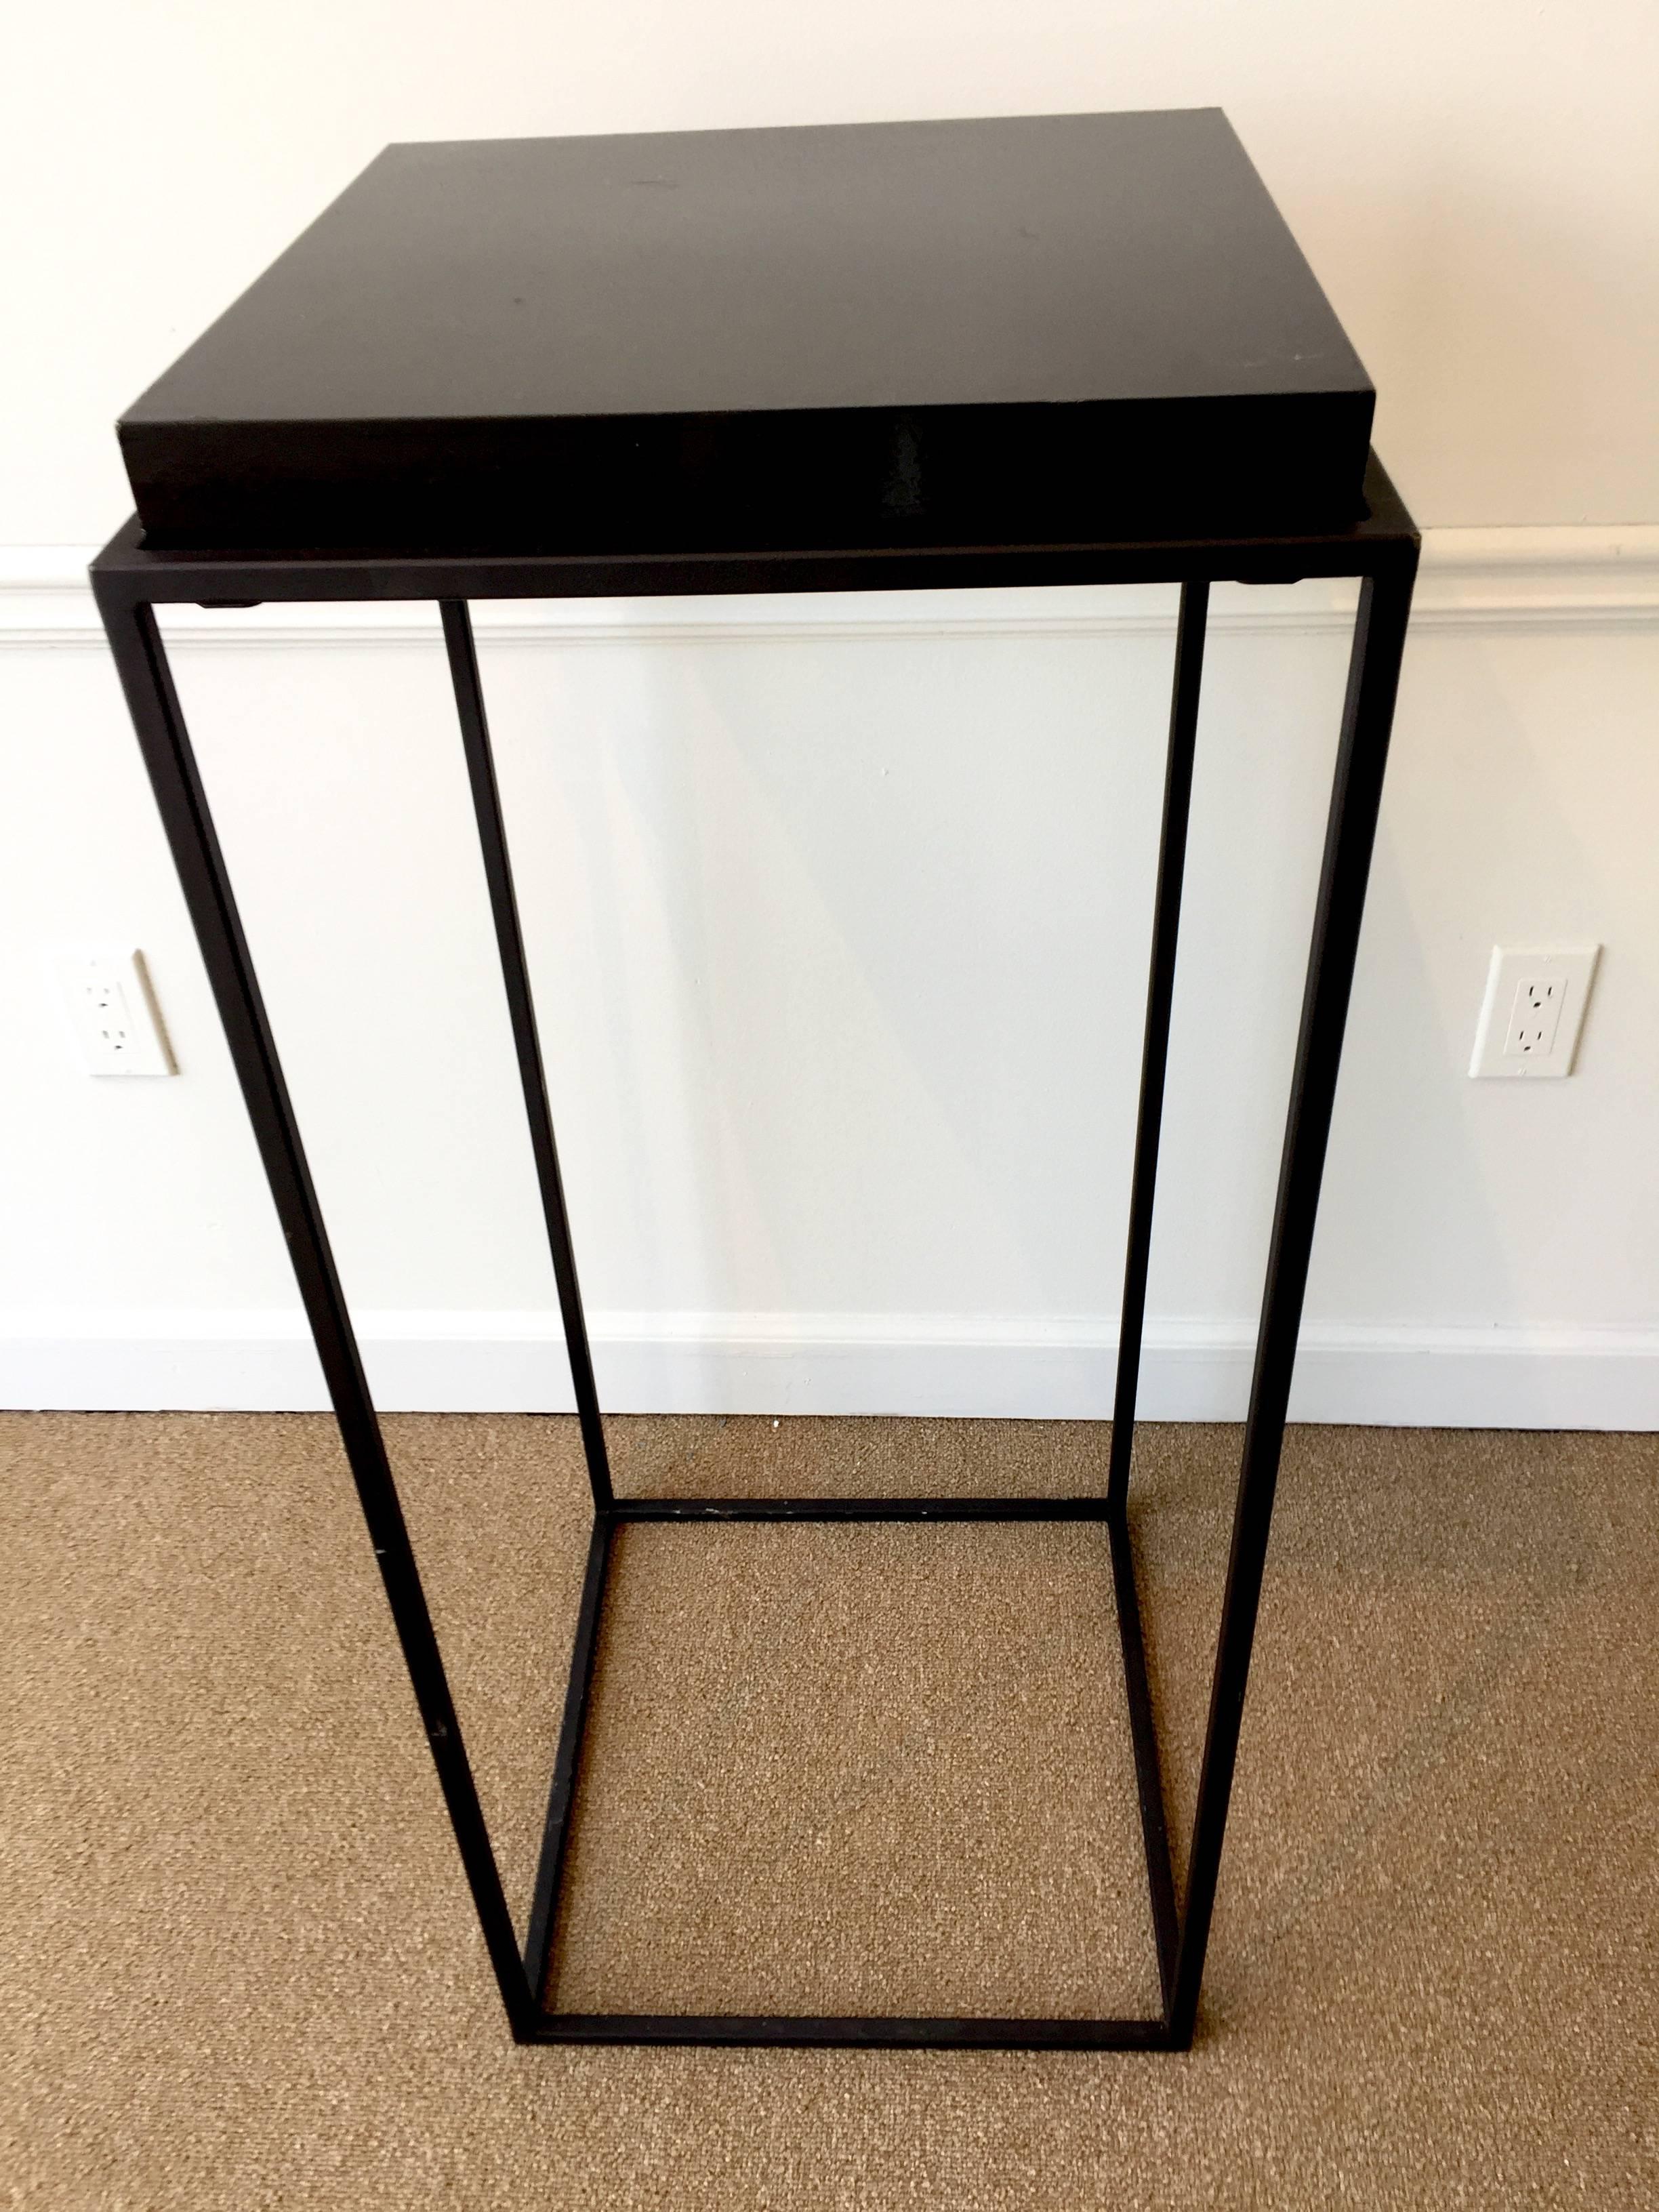 A pair of modern lacquer and iron modern pedestals, each one with a removable square lacquered plinth, raised on a four-column conforming pedestal base. Some minor scratches on the lacquer tops presents well.